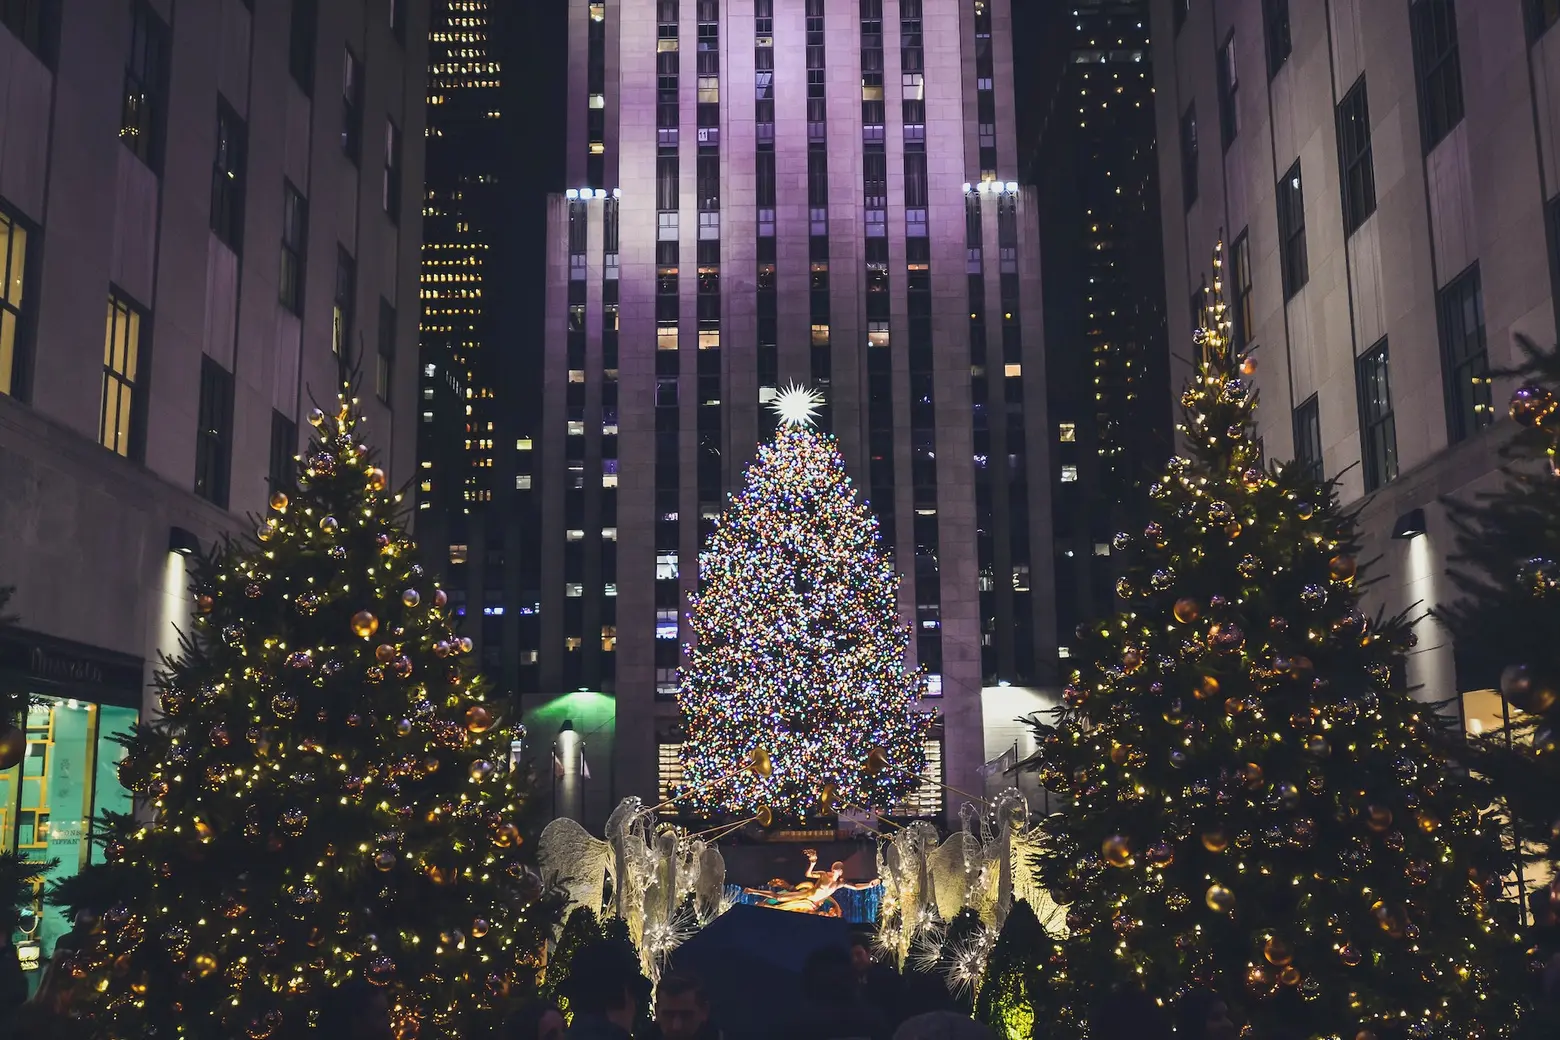 You’ll need timed tickets to see the Rockefeller Center Christmas Tree this year